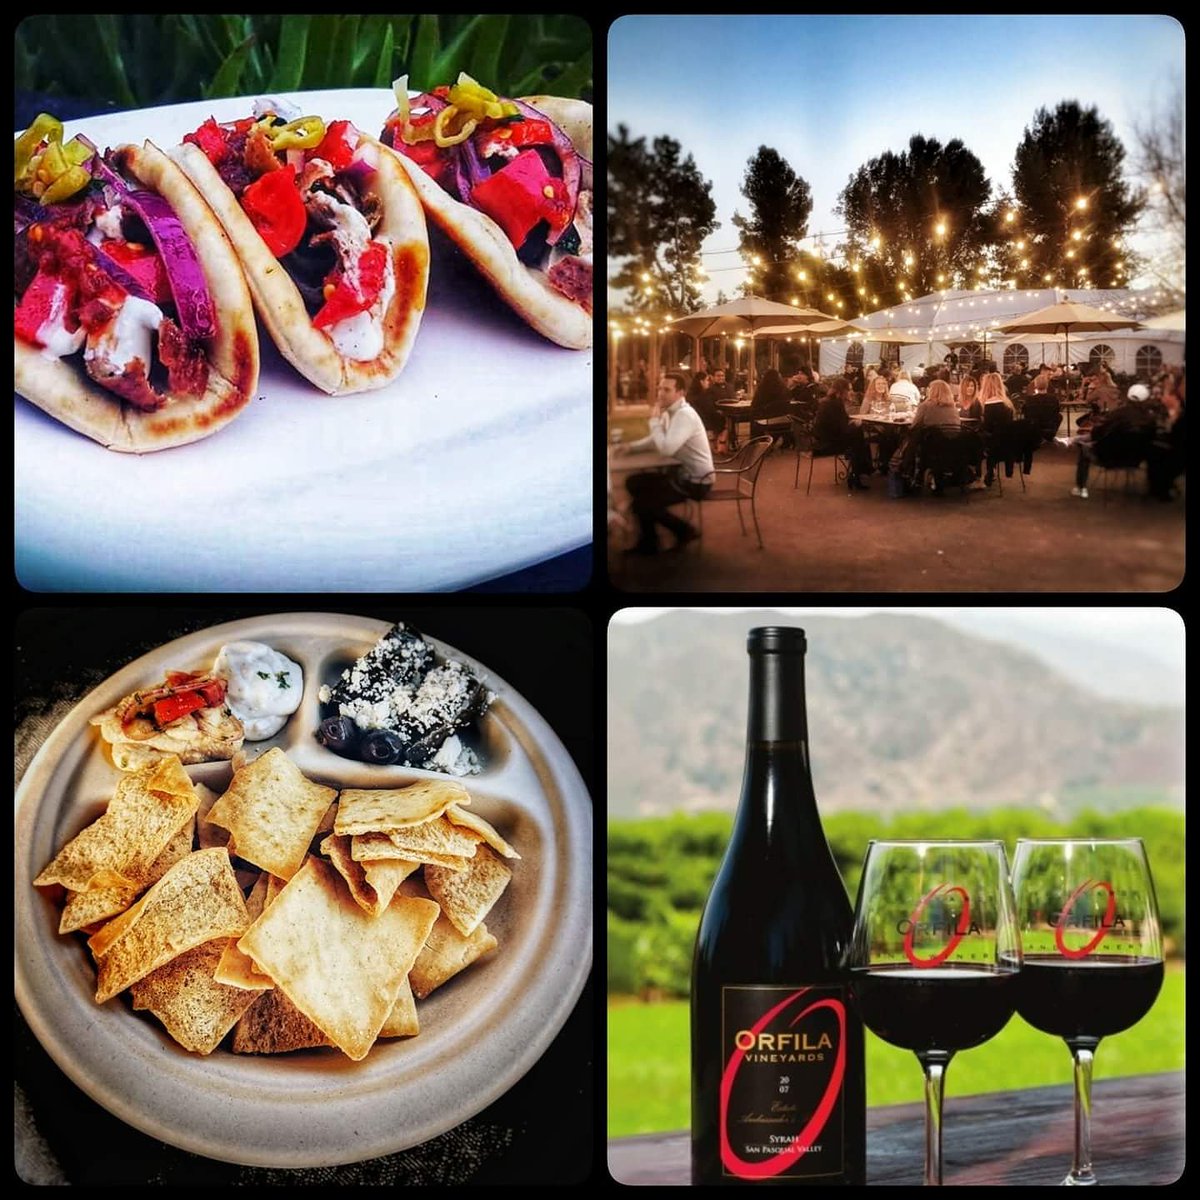 🍖🍷🎶 Celebrate Mom a little early with a glass of wine, delicious Greek food and live music. 🍖🍷🎶

🗓️ Friday May 11th
📍 Orfila Vineyards & Winery
🕒 3pm - 7pm

#sdwine #moms #livemusic #northcounty #gyro #greeknachos #falafel #gyrosliders #greekfood #sandiegostyle